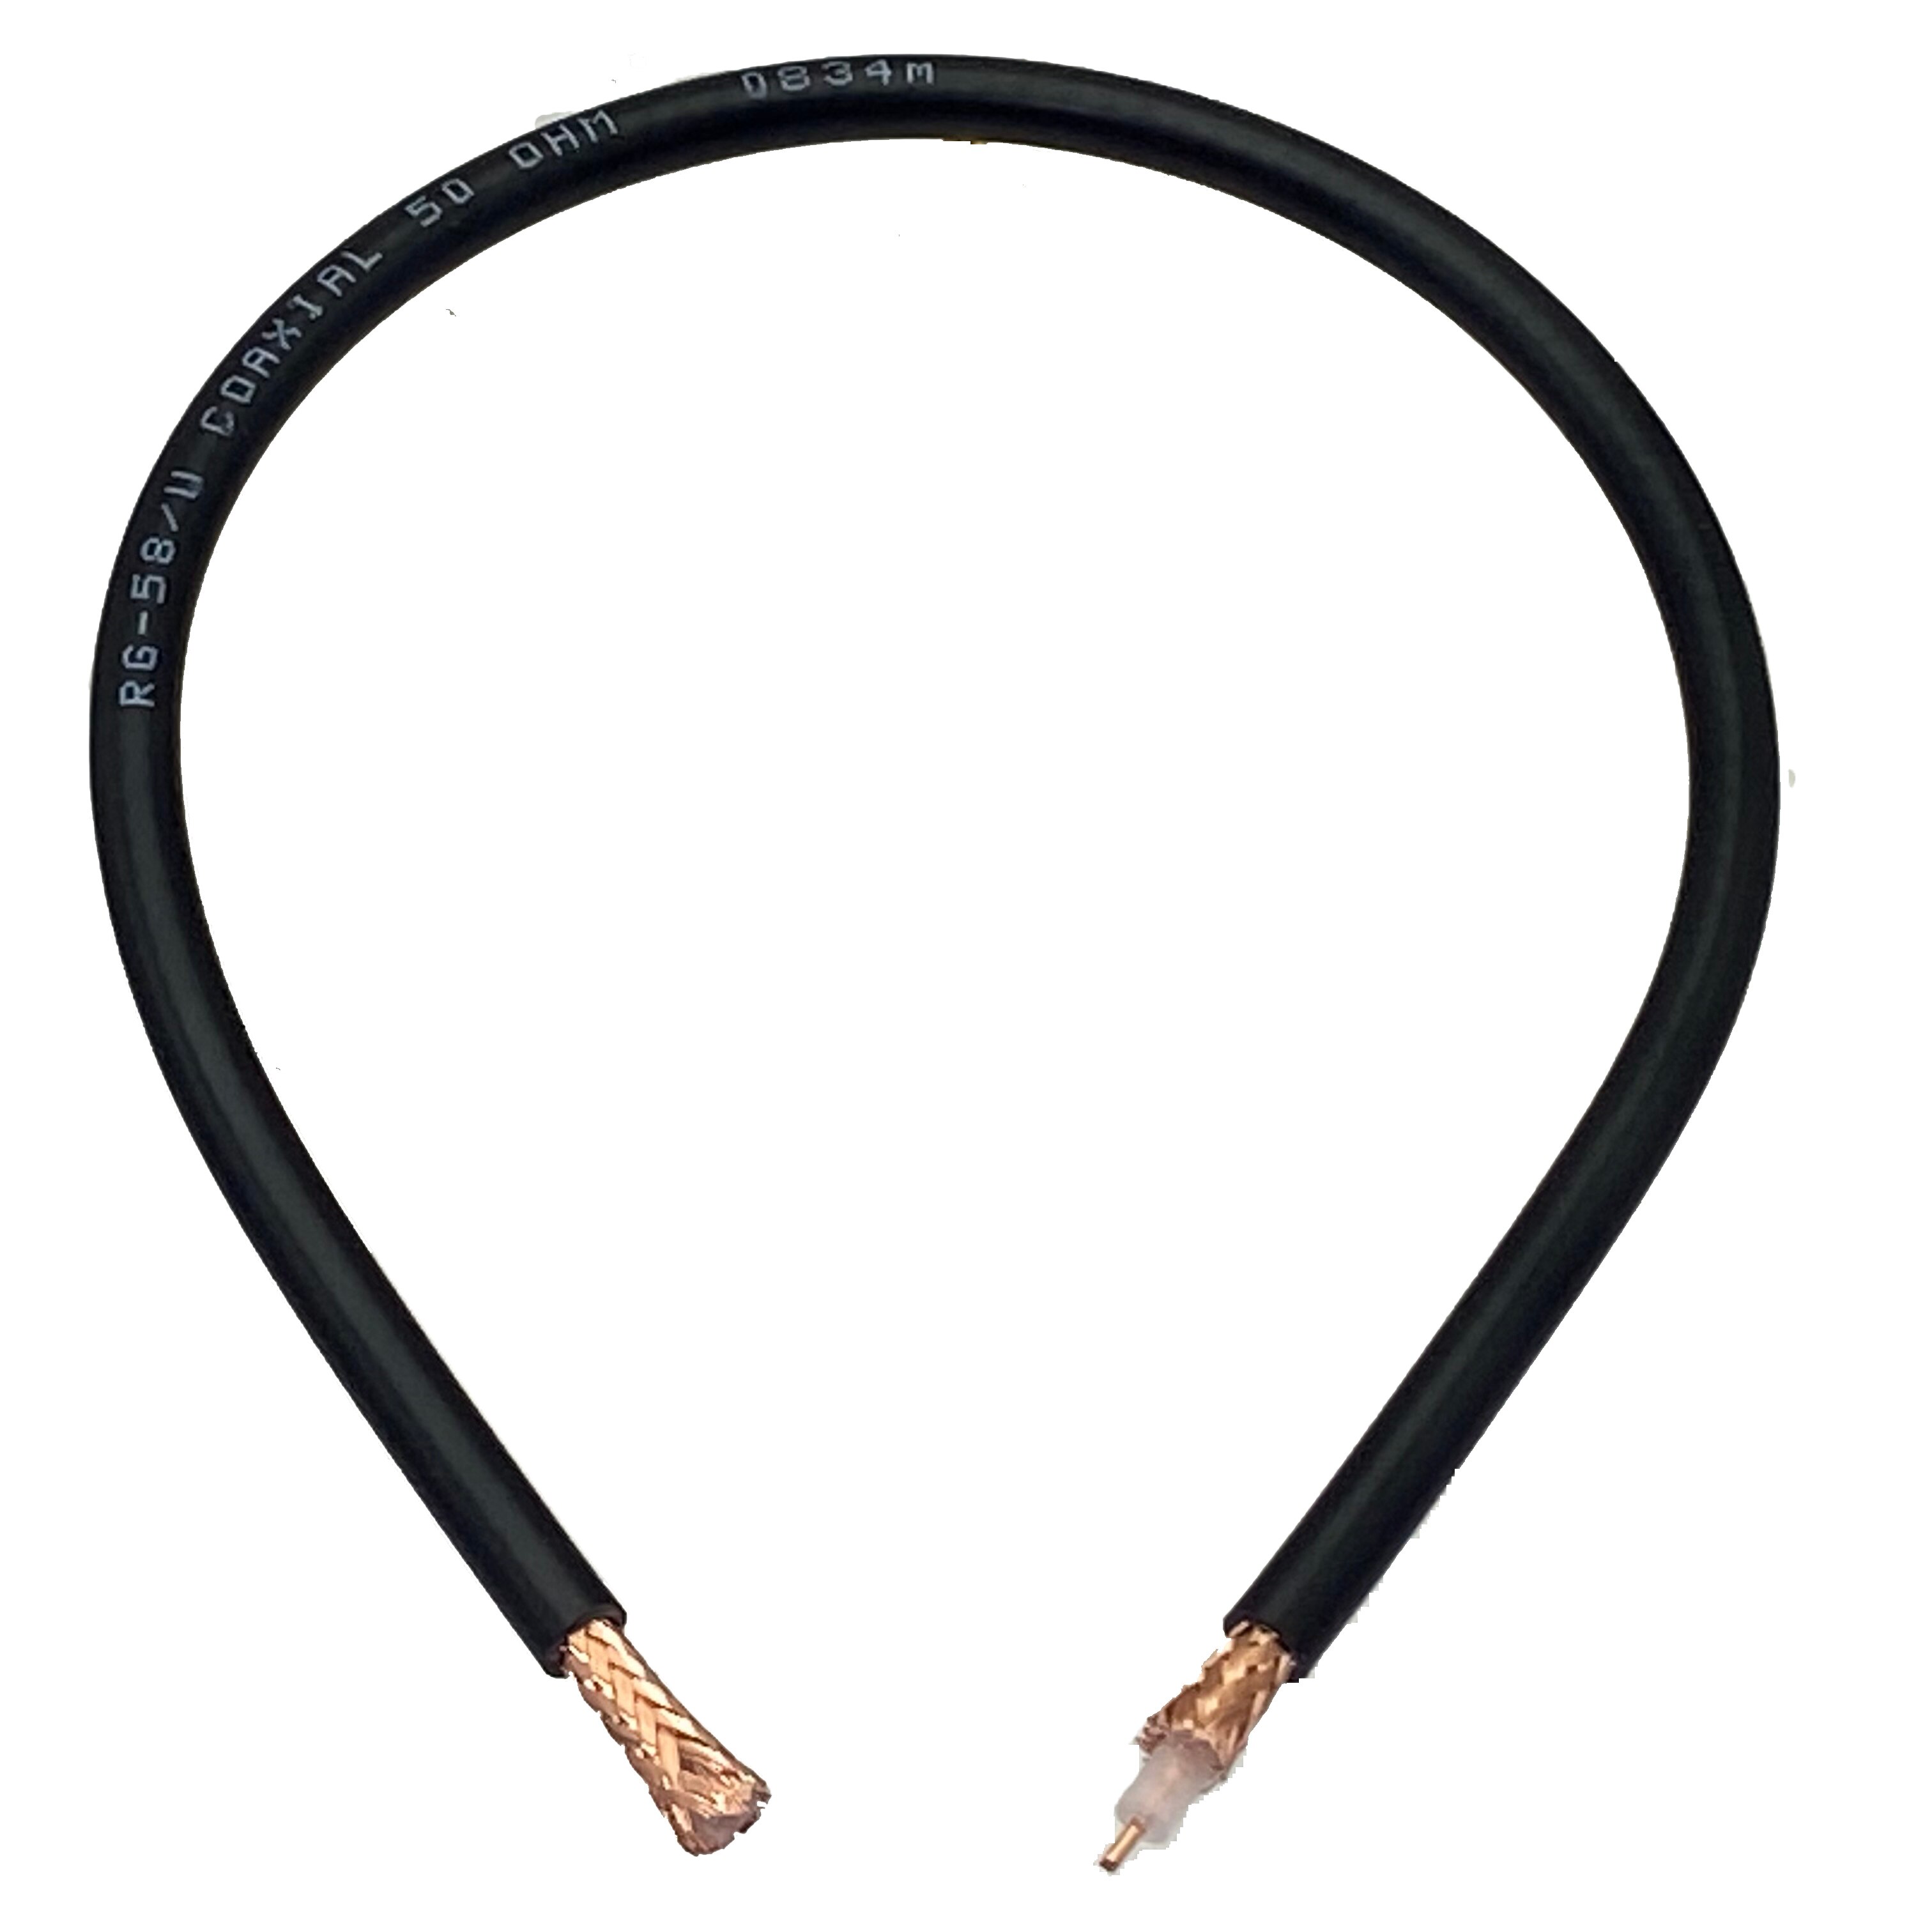 RG58 50-3 RF Coaxial Cable Connector 50ohm Coax Transceiver Pigtail Wire Cables 1M 2M 3M 5M 10M 20M 30M